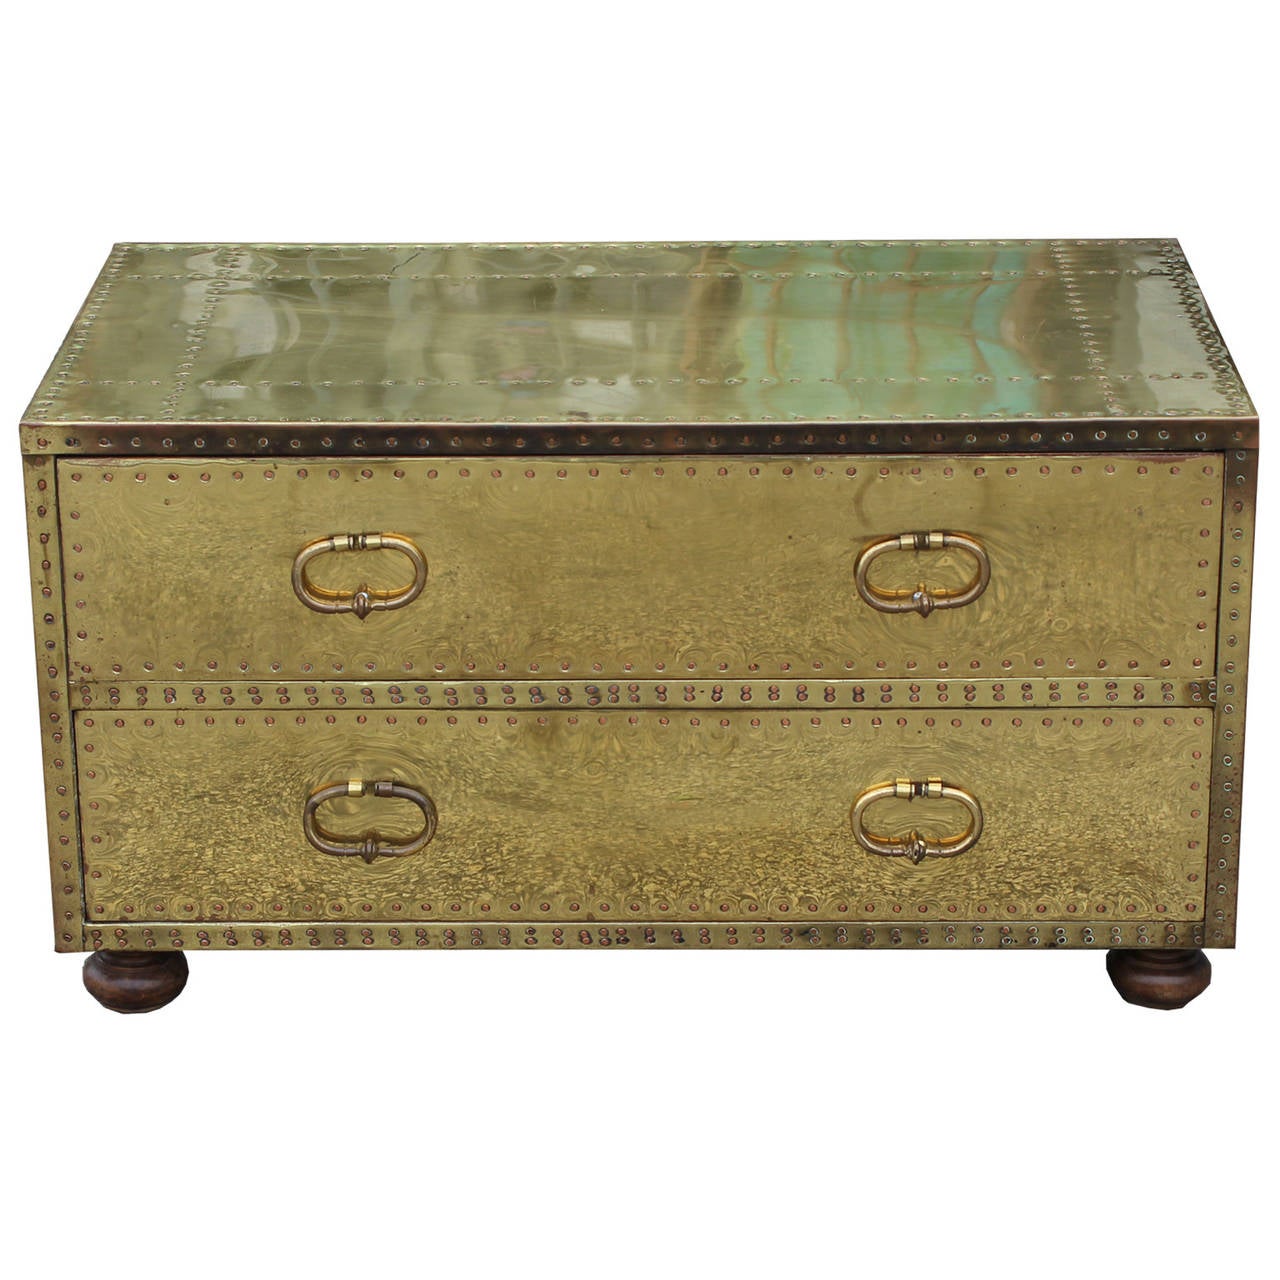 Great little campaign style brass chest by Sarreid. Brass has a wonderful warm patina. Chest sits atop small wooden bun feet. Would be great as a nighstand or side table.